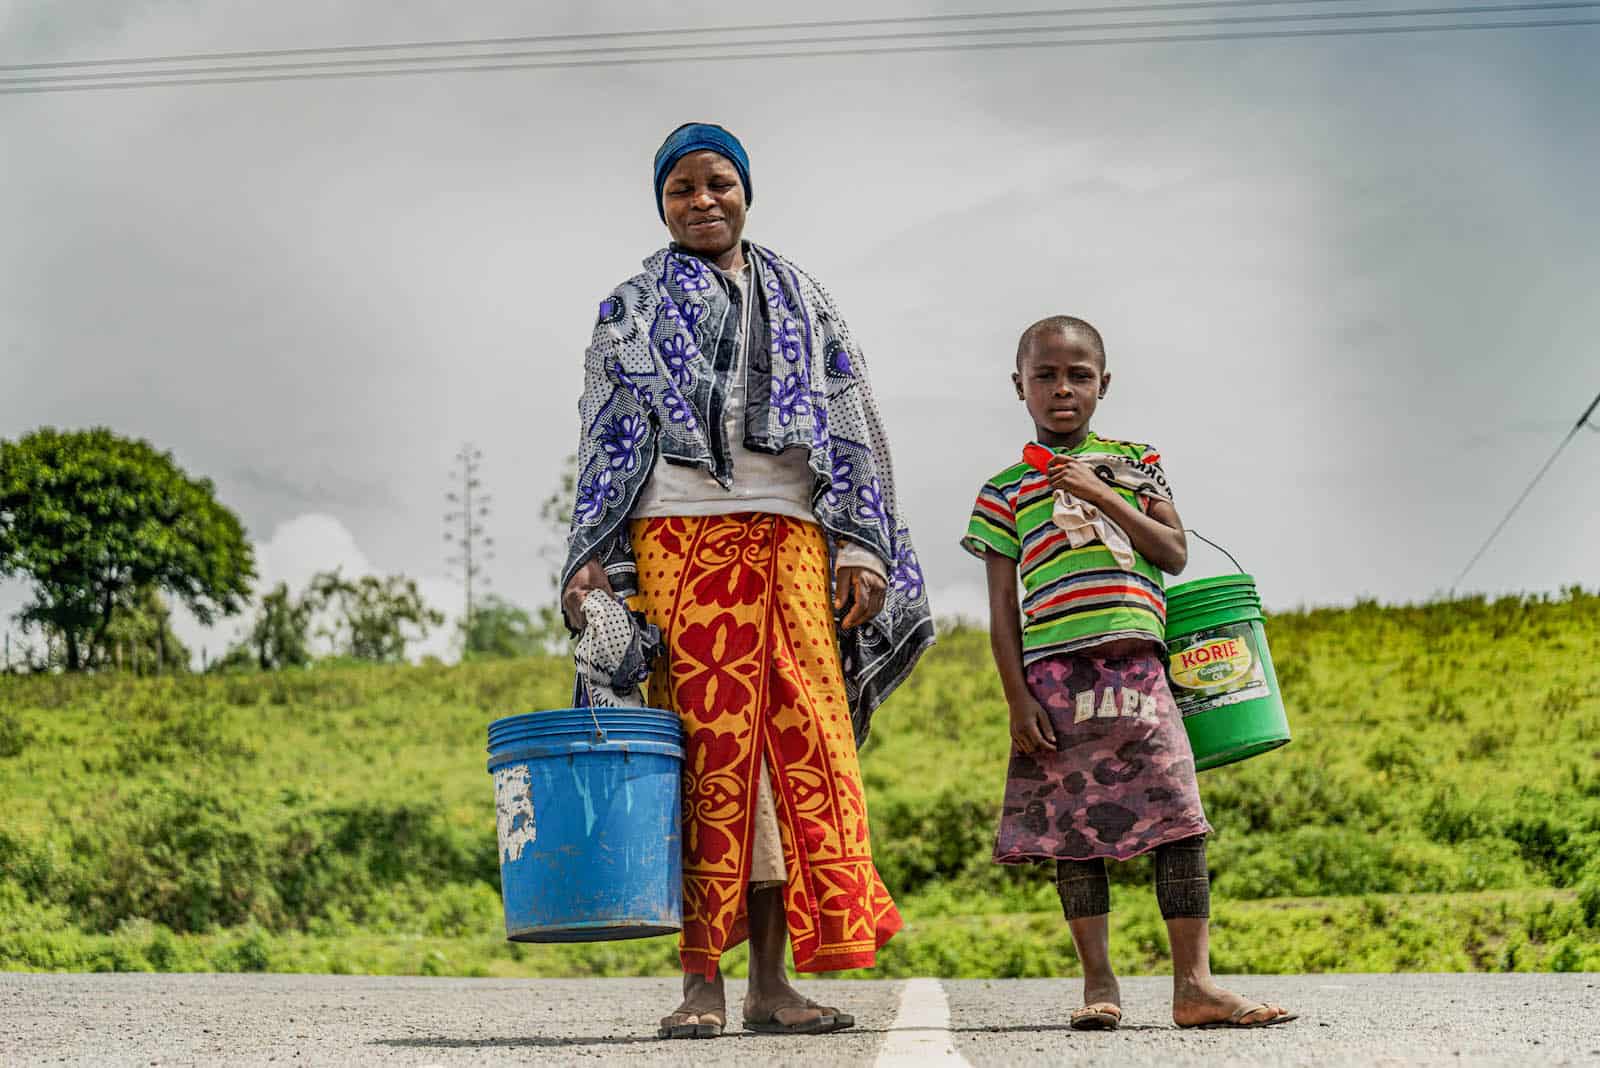 A woman and a girl stand on a street, holding buckets